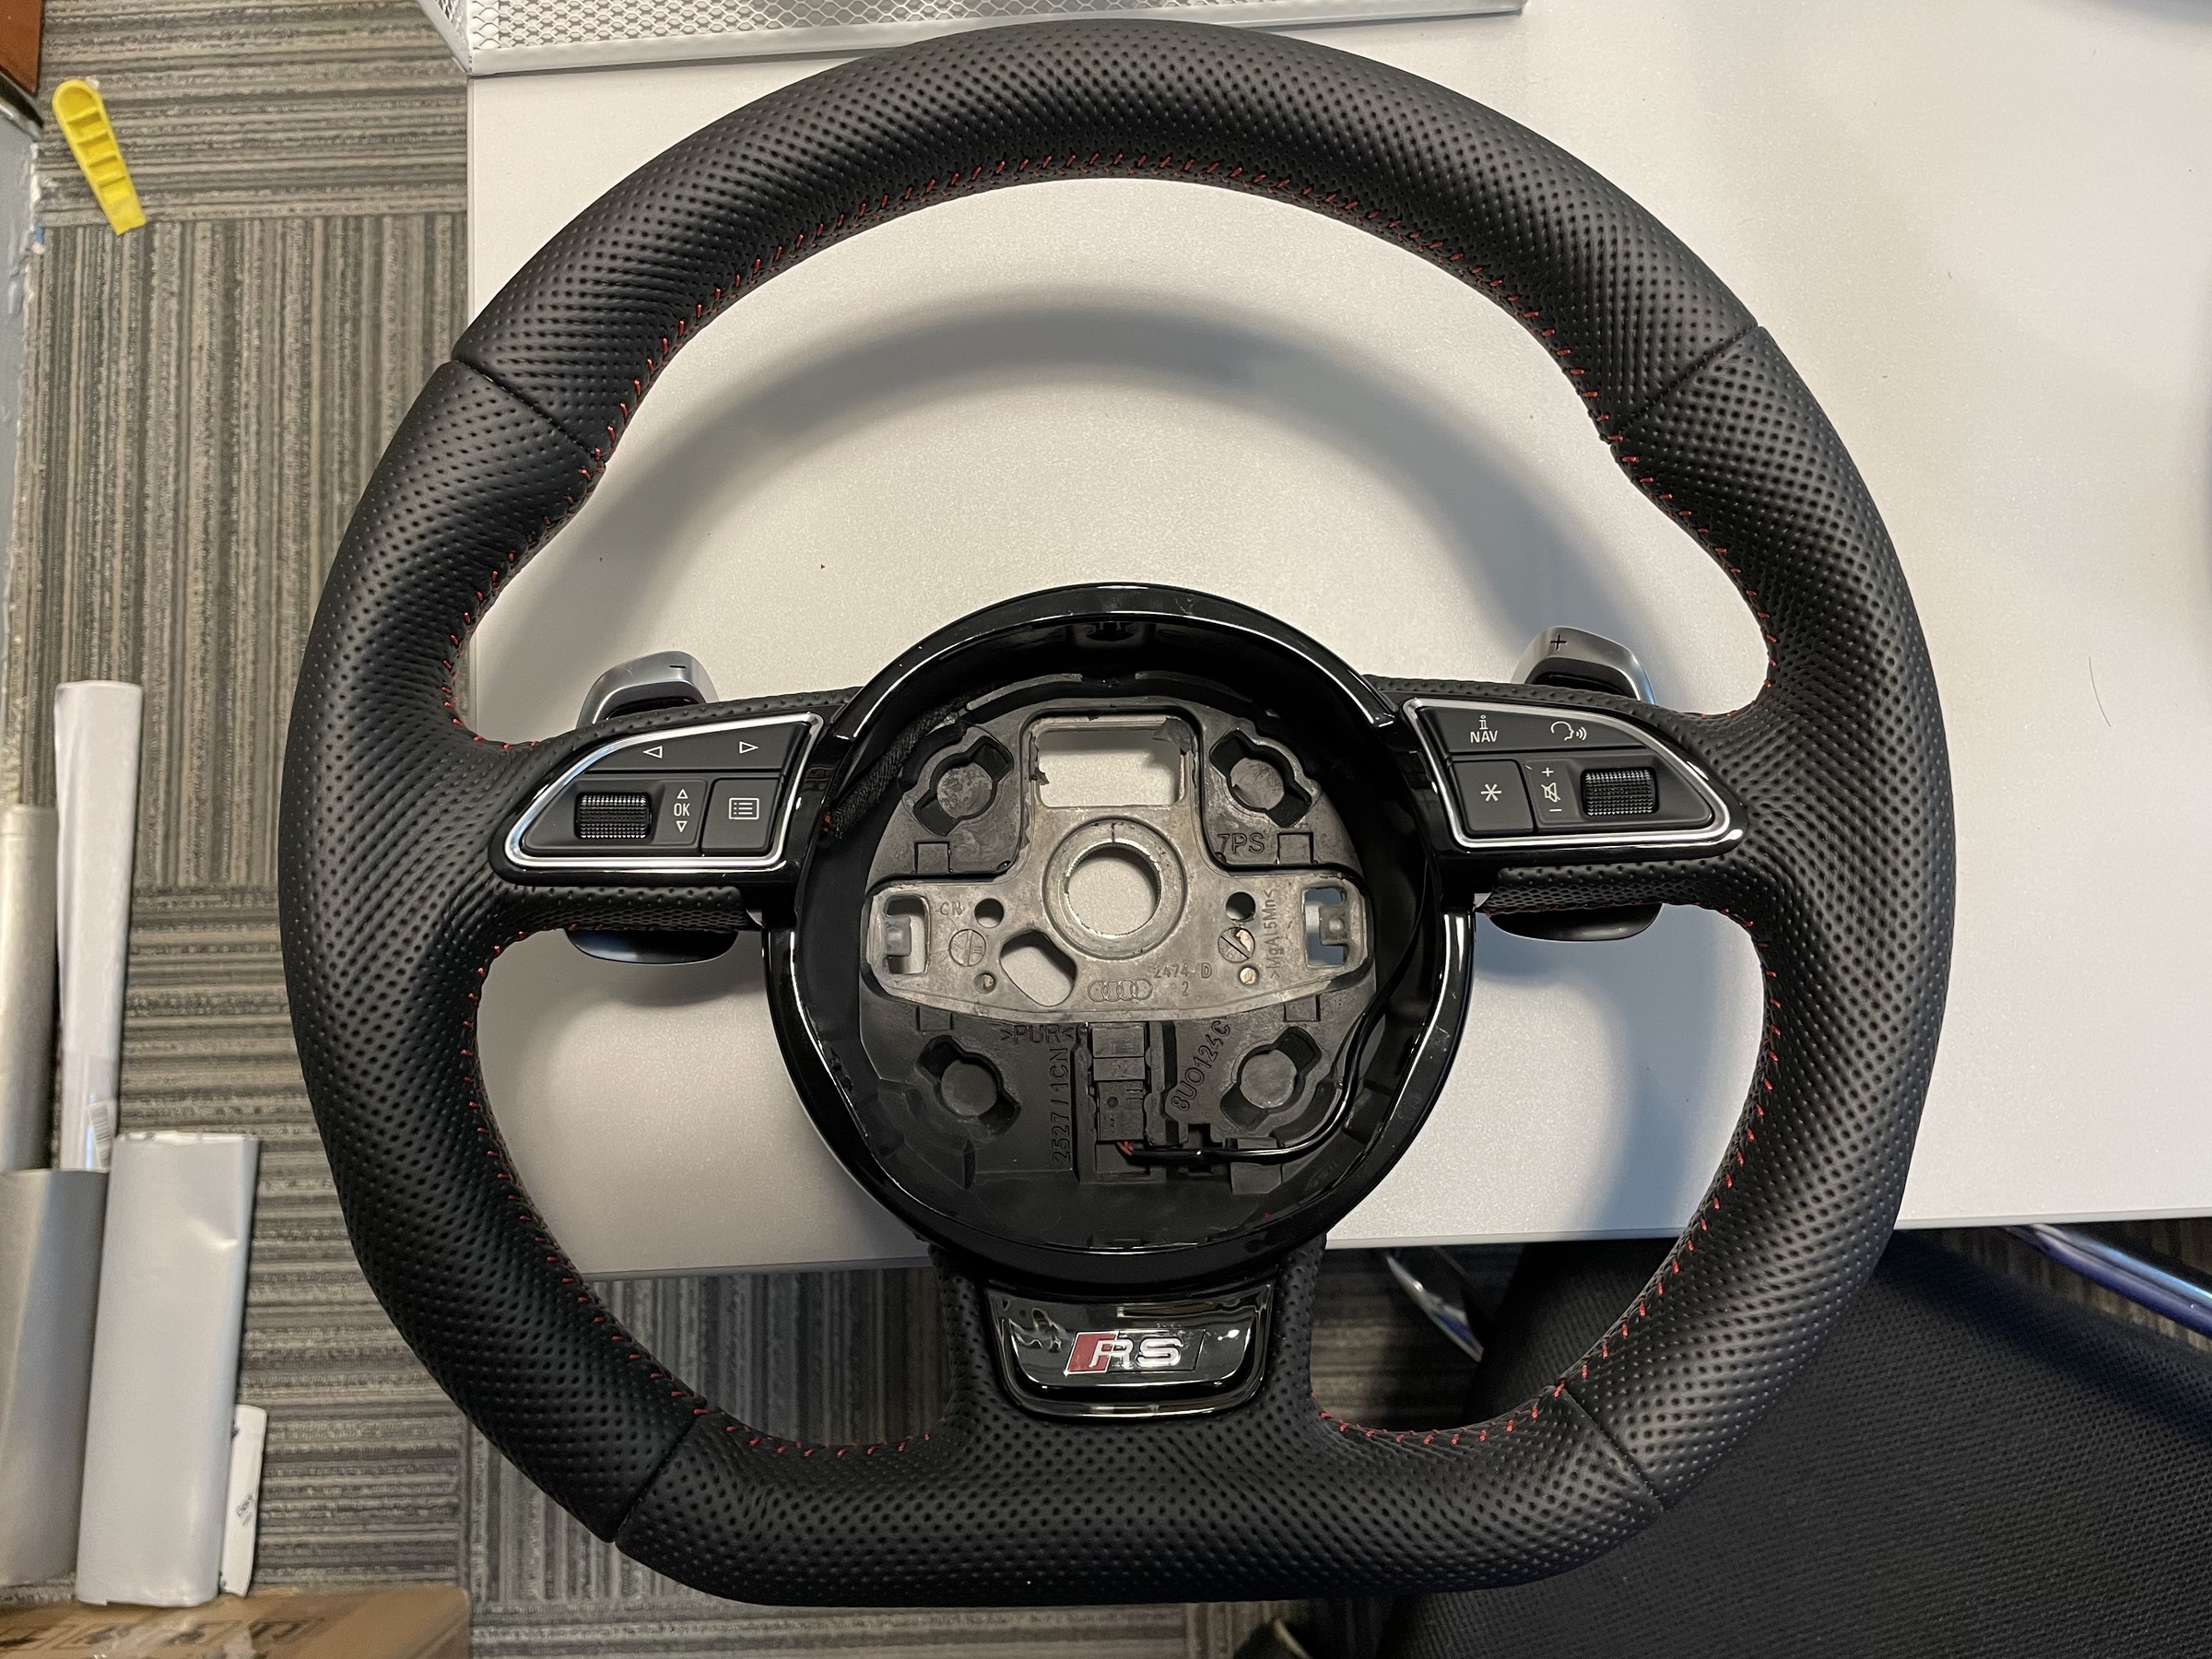 Audi A3 8V pre facelift steering wheel without airbag – Modhub Steering ...